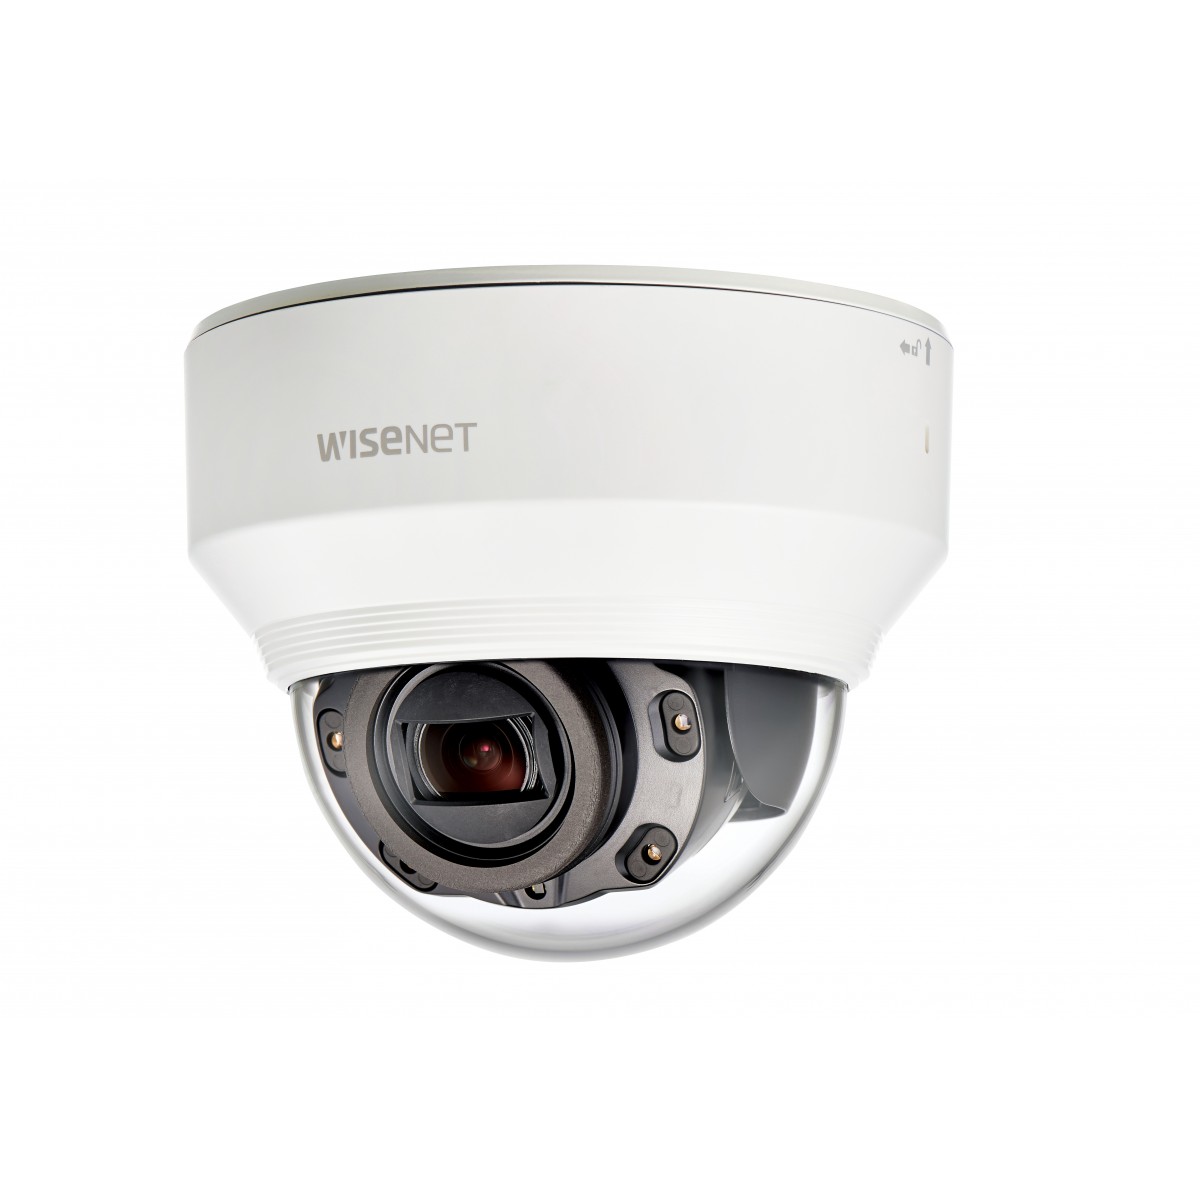 Hanwha Techwin Hanwha XND-6080R - IP security camera - Indoor - Wired - Digital PTZ - Preset point - Simplified Chinese - Czech 